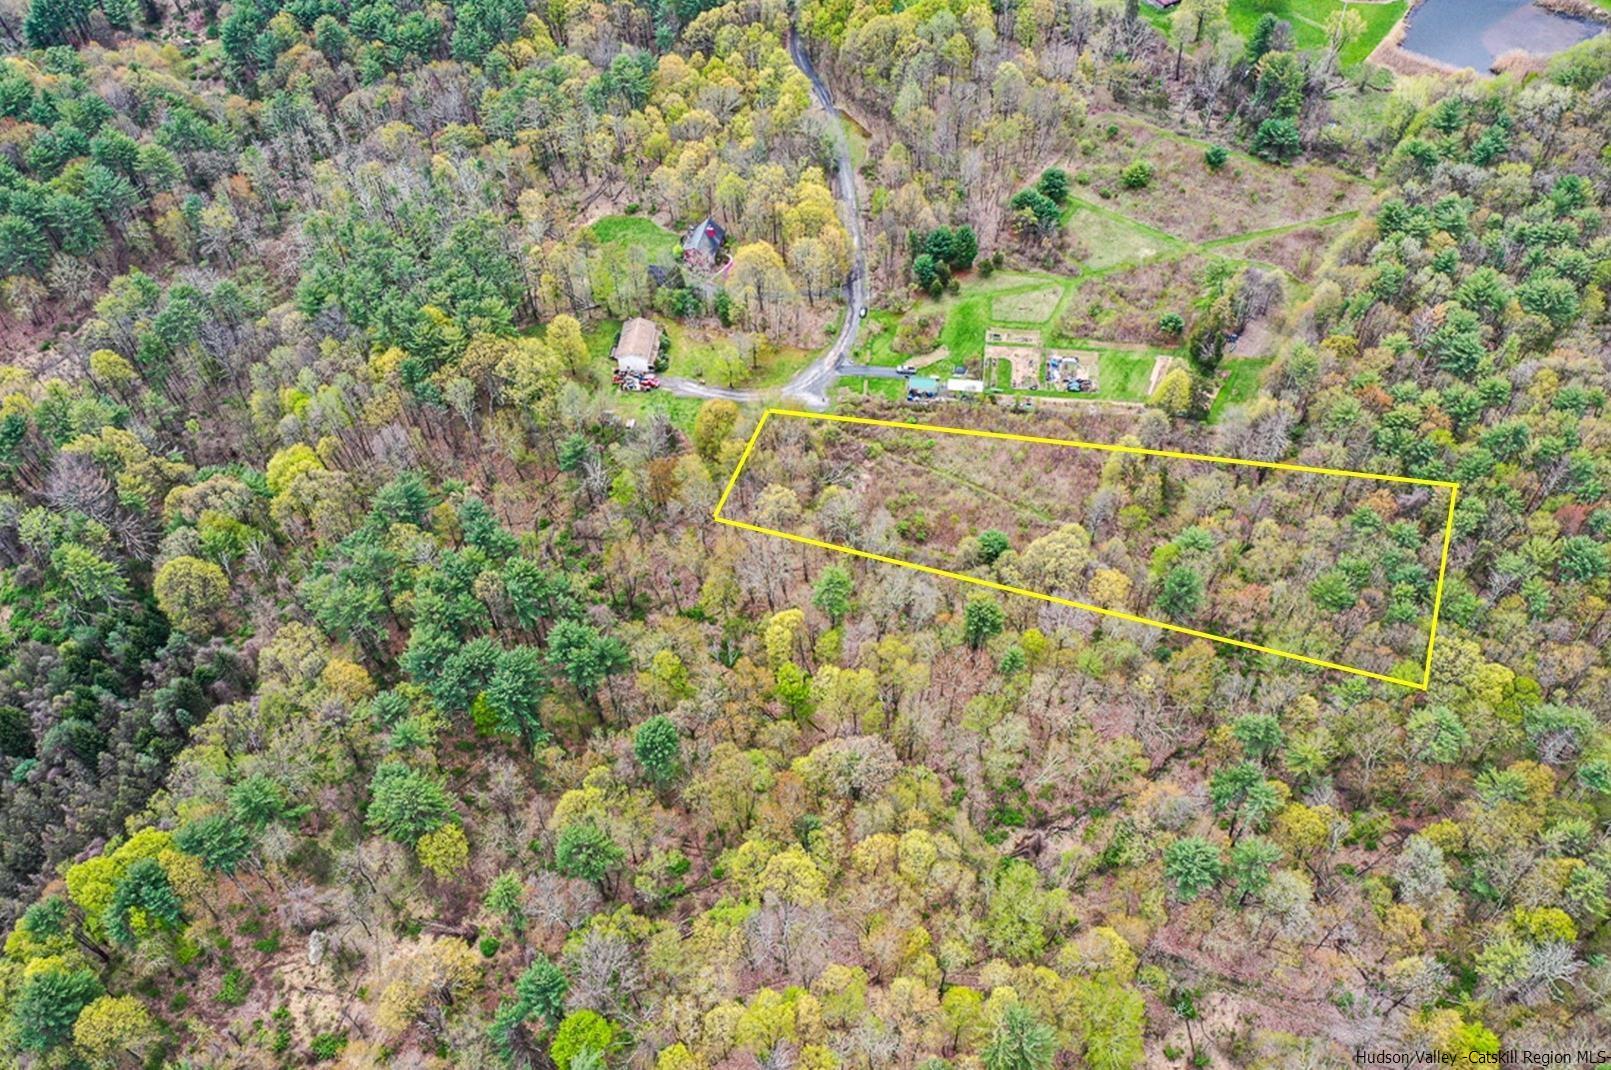 Beautiful 5.2 Acre lot on a quiet dead end road located in the town of Saugerties. Zoned MDR – allows for 1 acre minimum to build. Multiple areas to build here. Close to Woodstock & Catskill.